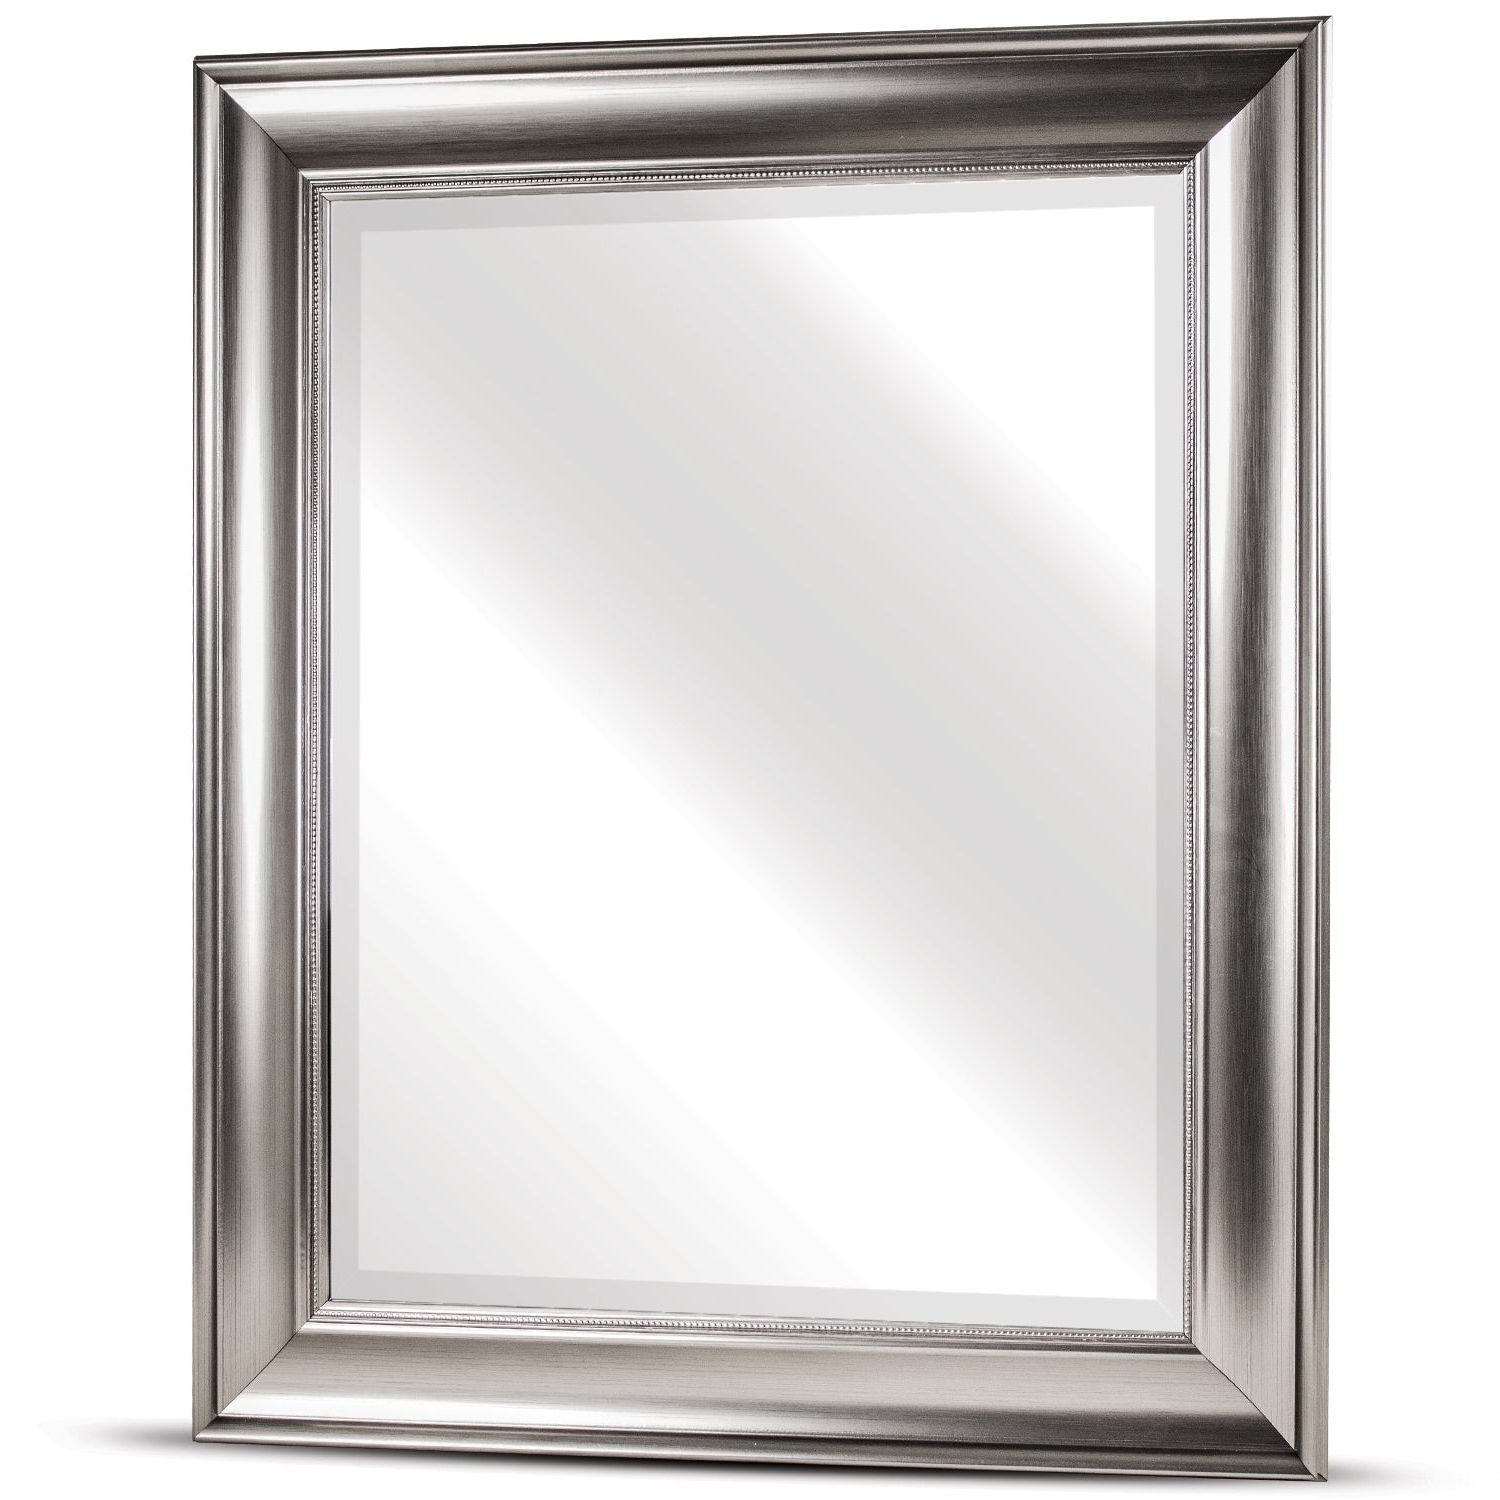 American Art Decor Clarence Medium Rectangular Silver Textured Accent  Framed Beveled Wall Vanity Mirror – A/n Intended For Best And Newest Rectangle Pewter Beveled Wall Mirrors (View 11 of 20)